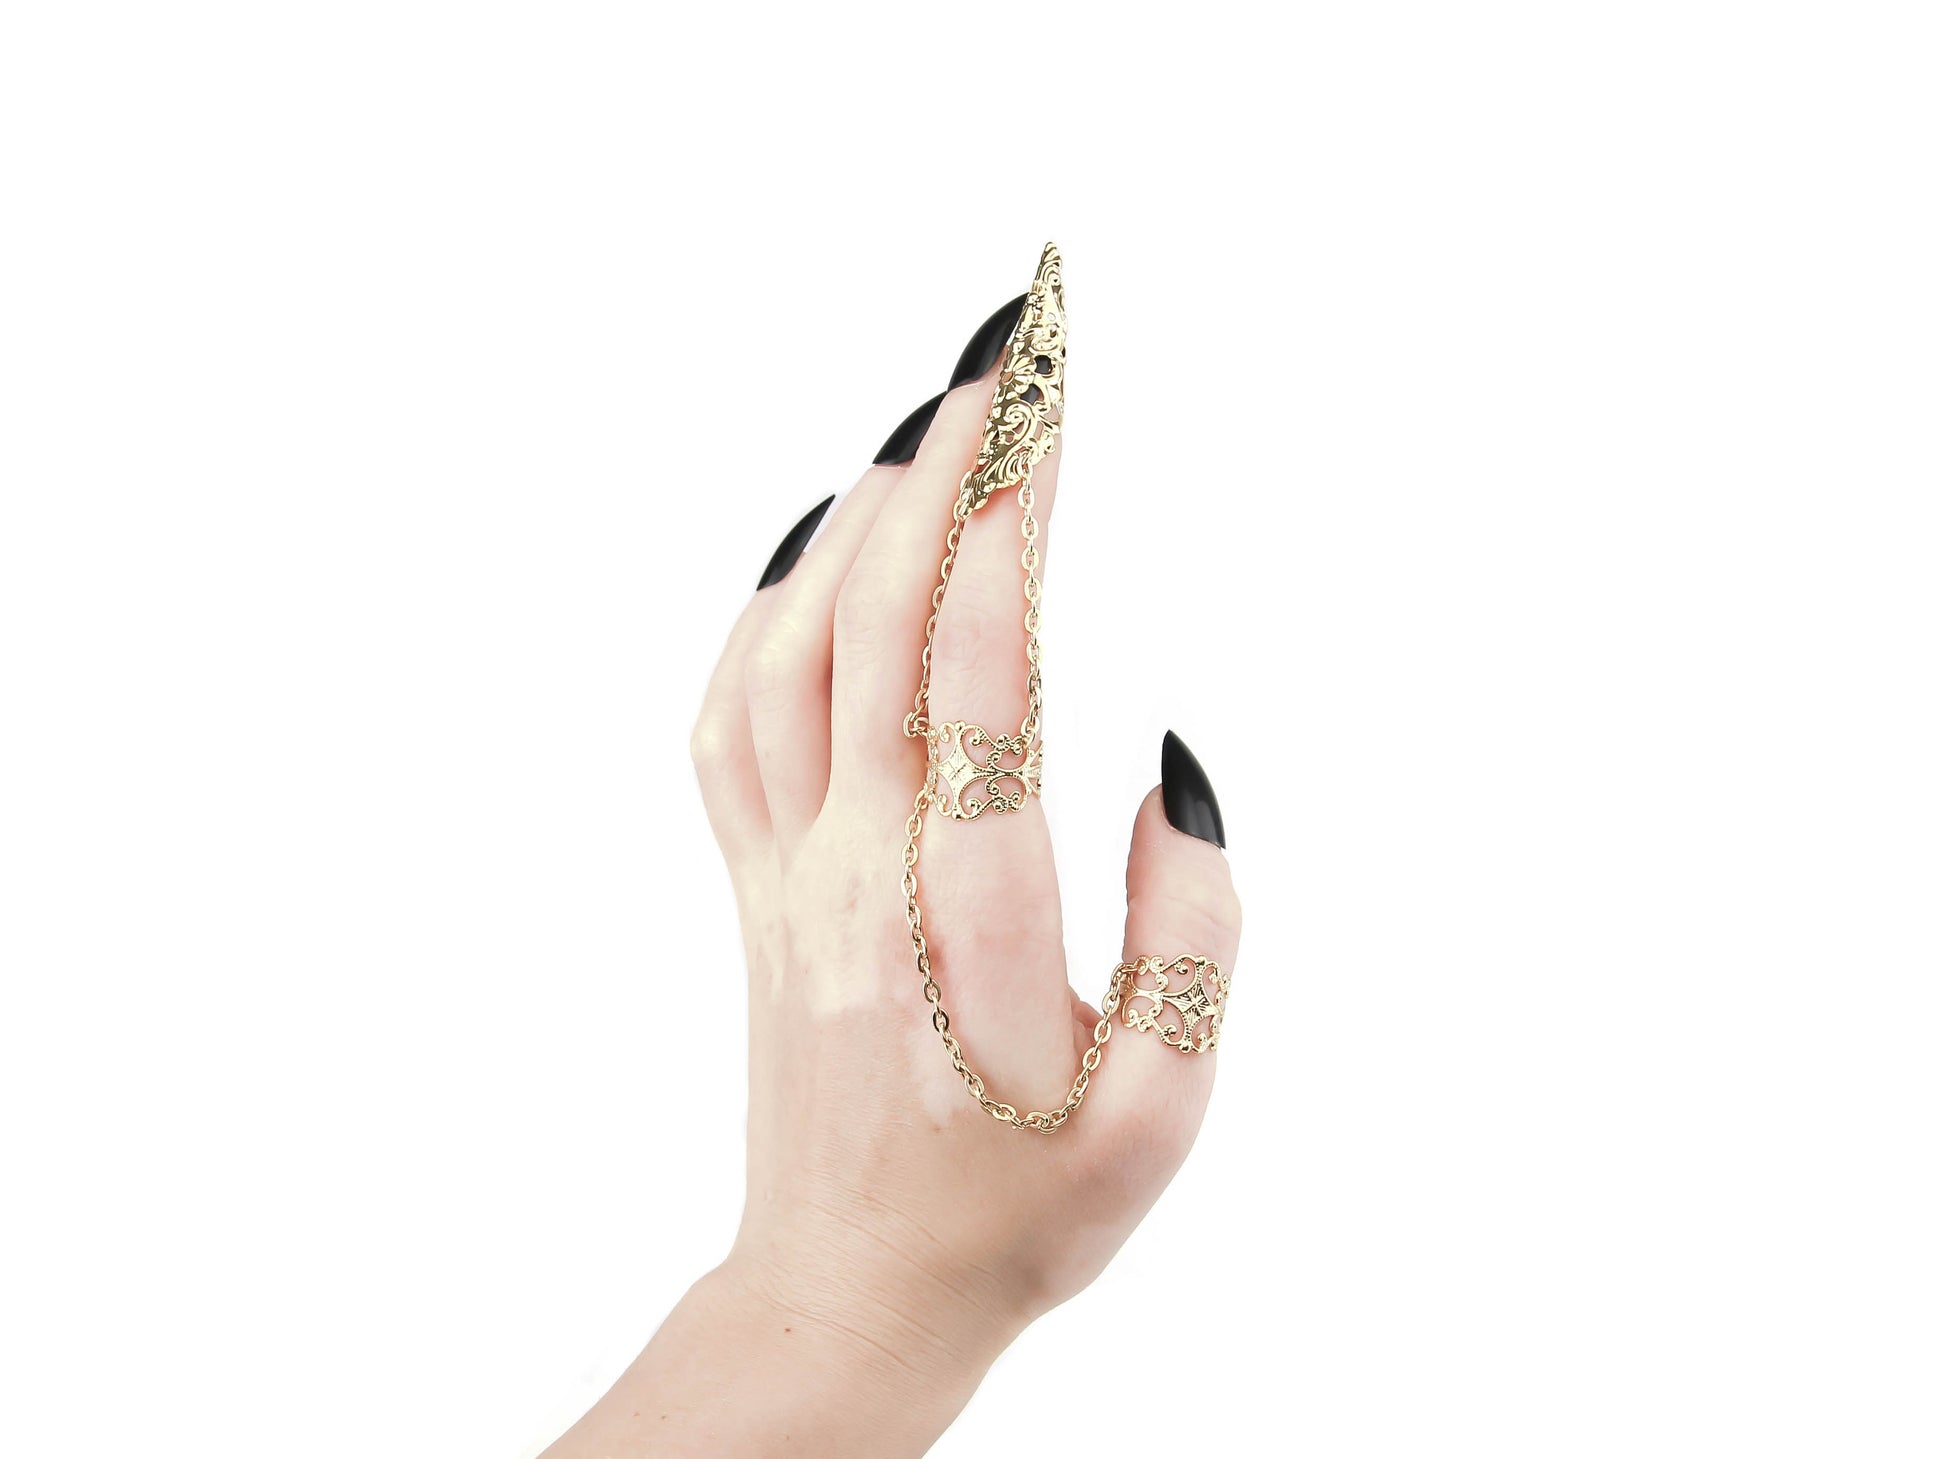 A hand models a Myril Jewels double ring, extending into a claw over the middle finger, crafted with intricate golddetailing. This piece is a bold statement of neo-gothic design, ideal for those who favor dark, avant-garde accessories. It's perfect for complementing a Halloween outfit, enhancing a punk wardrobe, or adding a touch of whimsigoth to everyday wear.